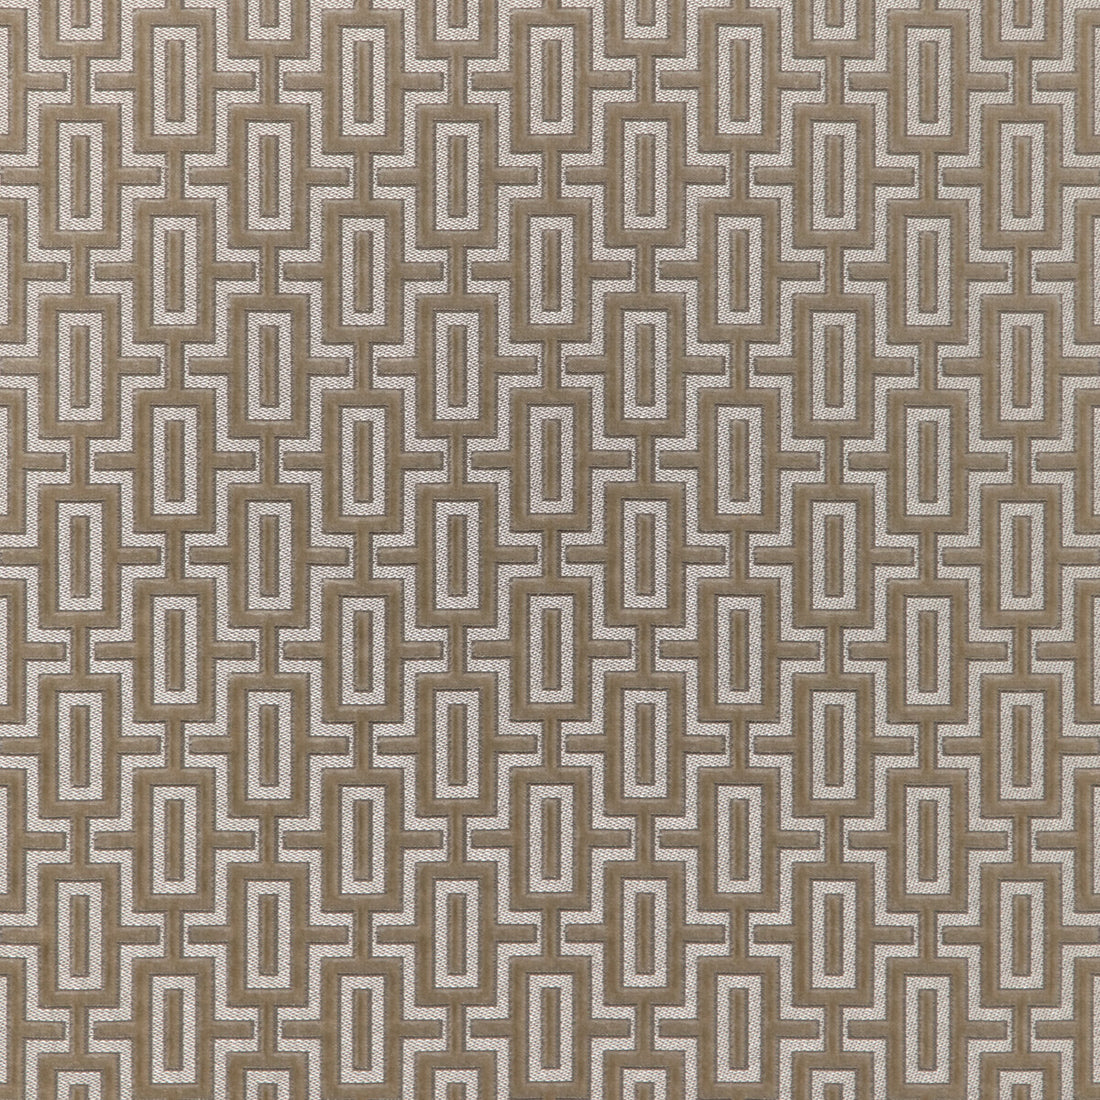 Joyride fabric in oyster color - pattern 37286.1101.0 - by Kravet Contract in the Happy Hour collection